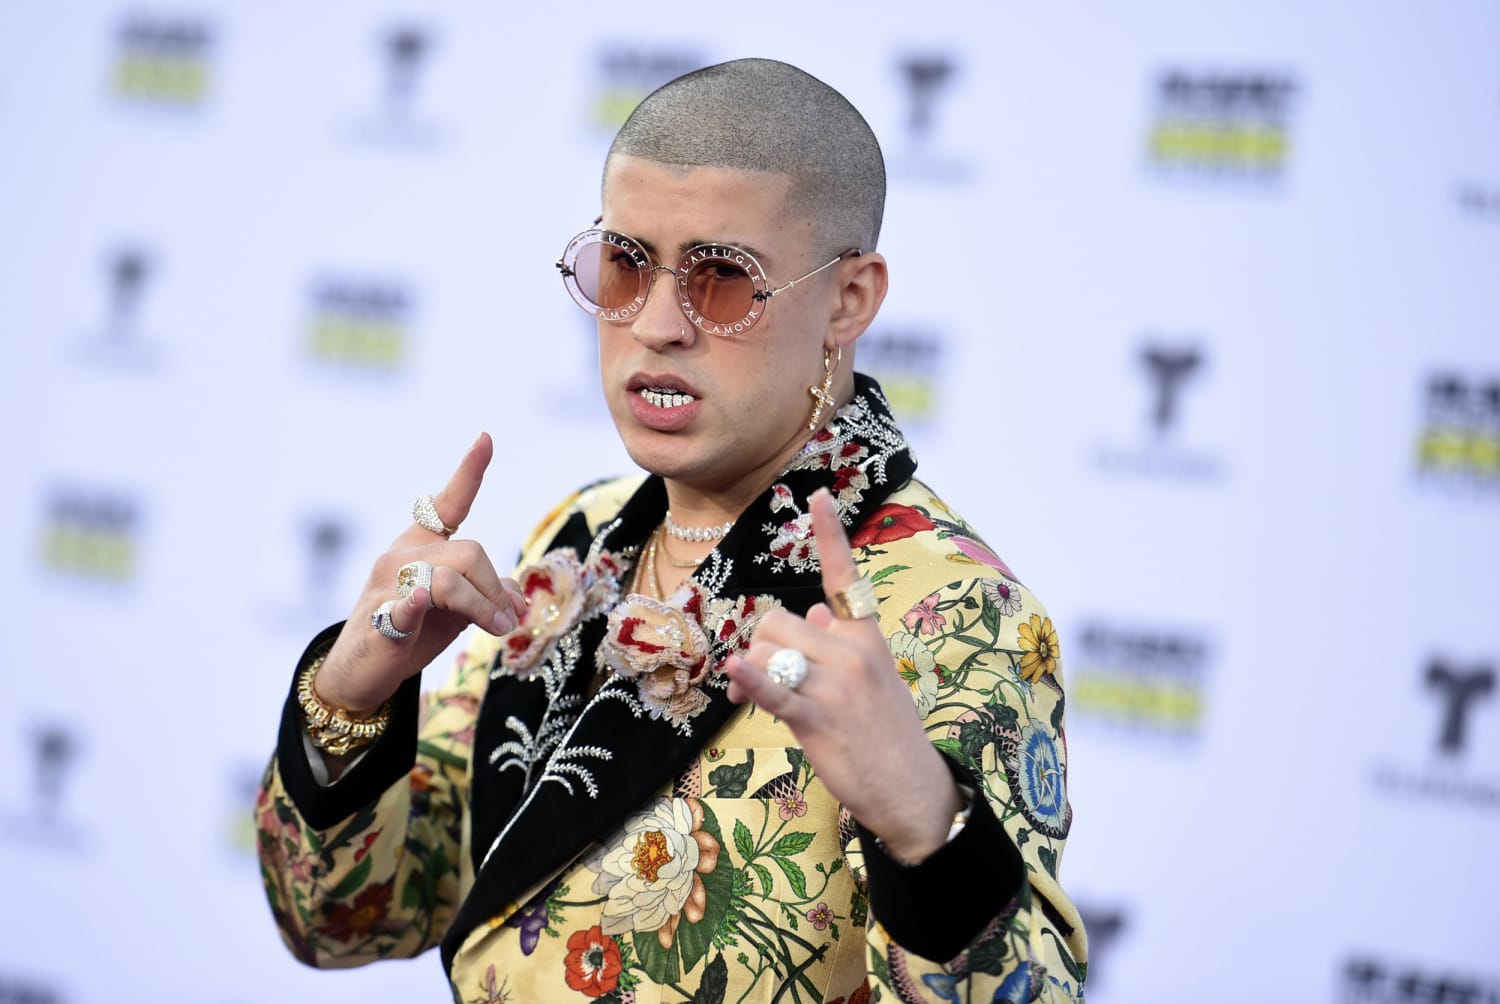 Bad Bunny: albums, songs, playlists